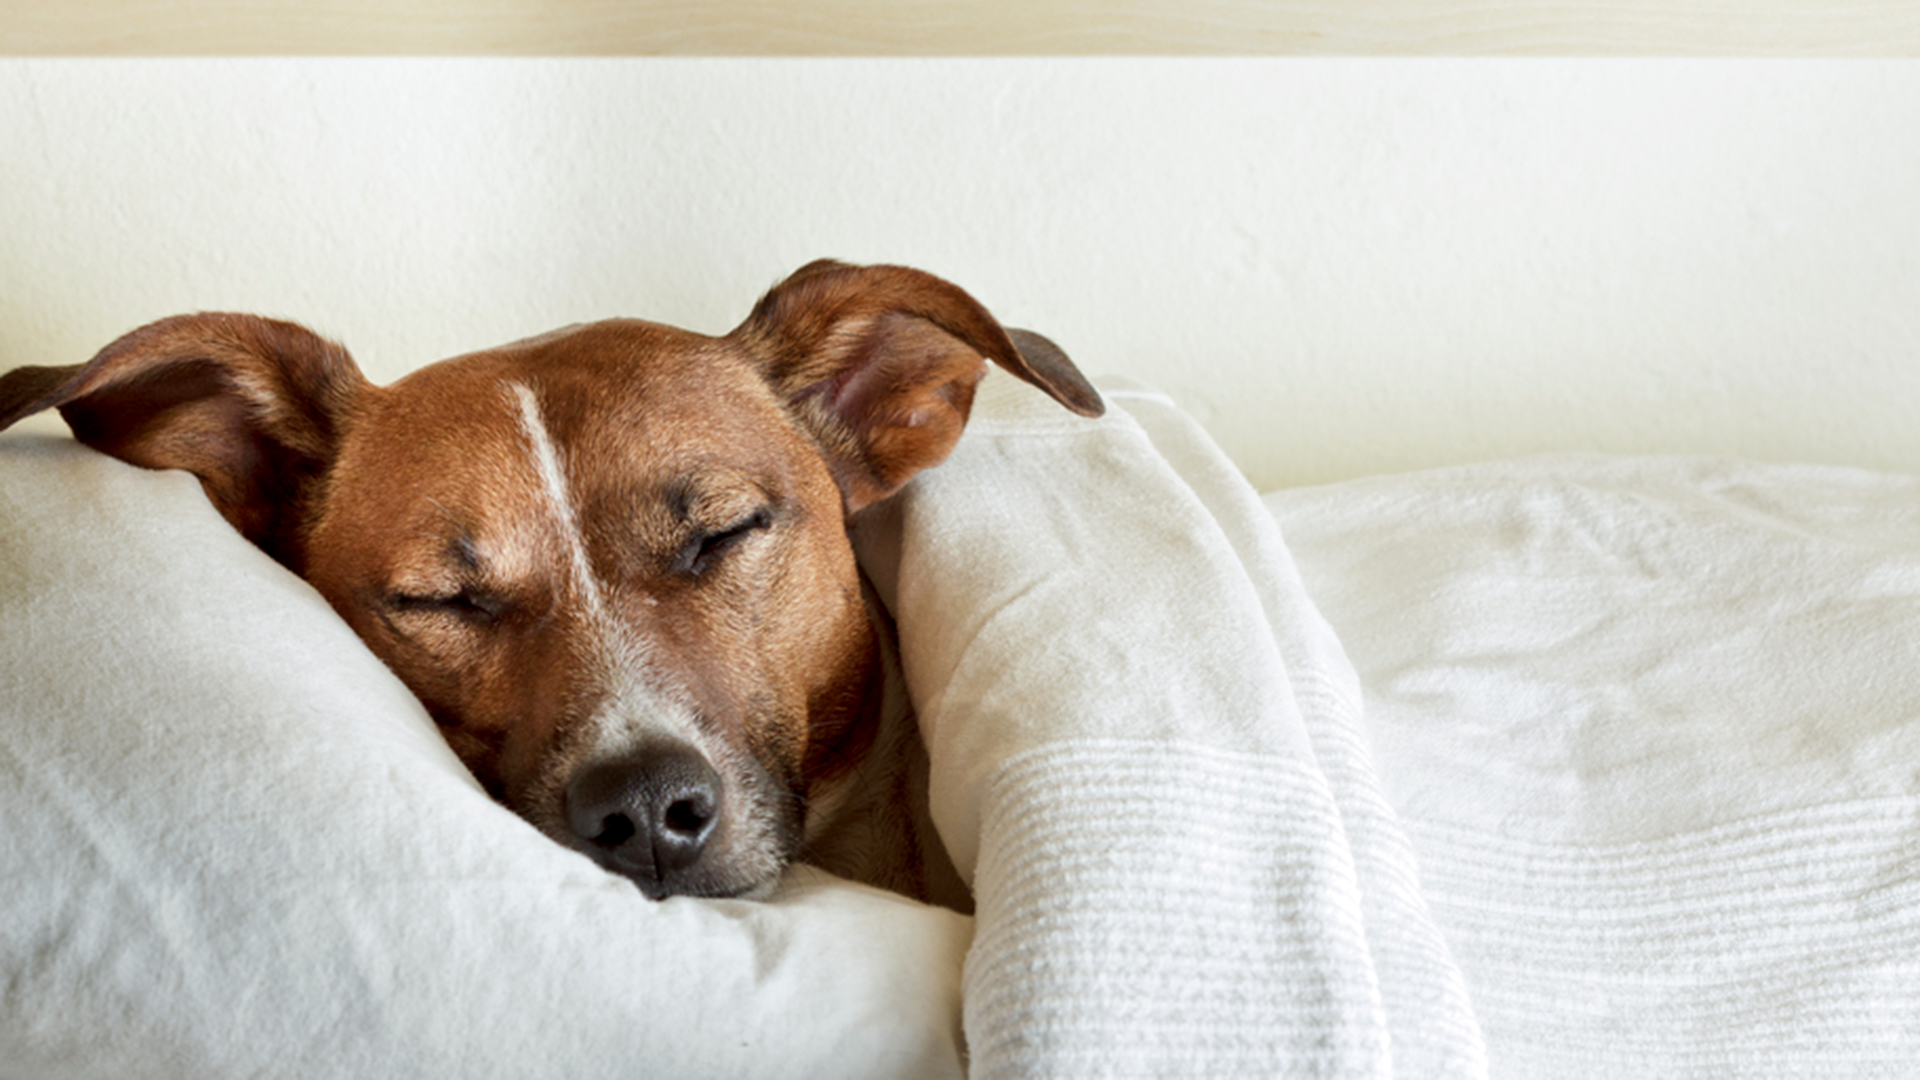 Should you pet your dog while sleeping?